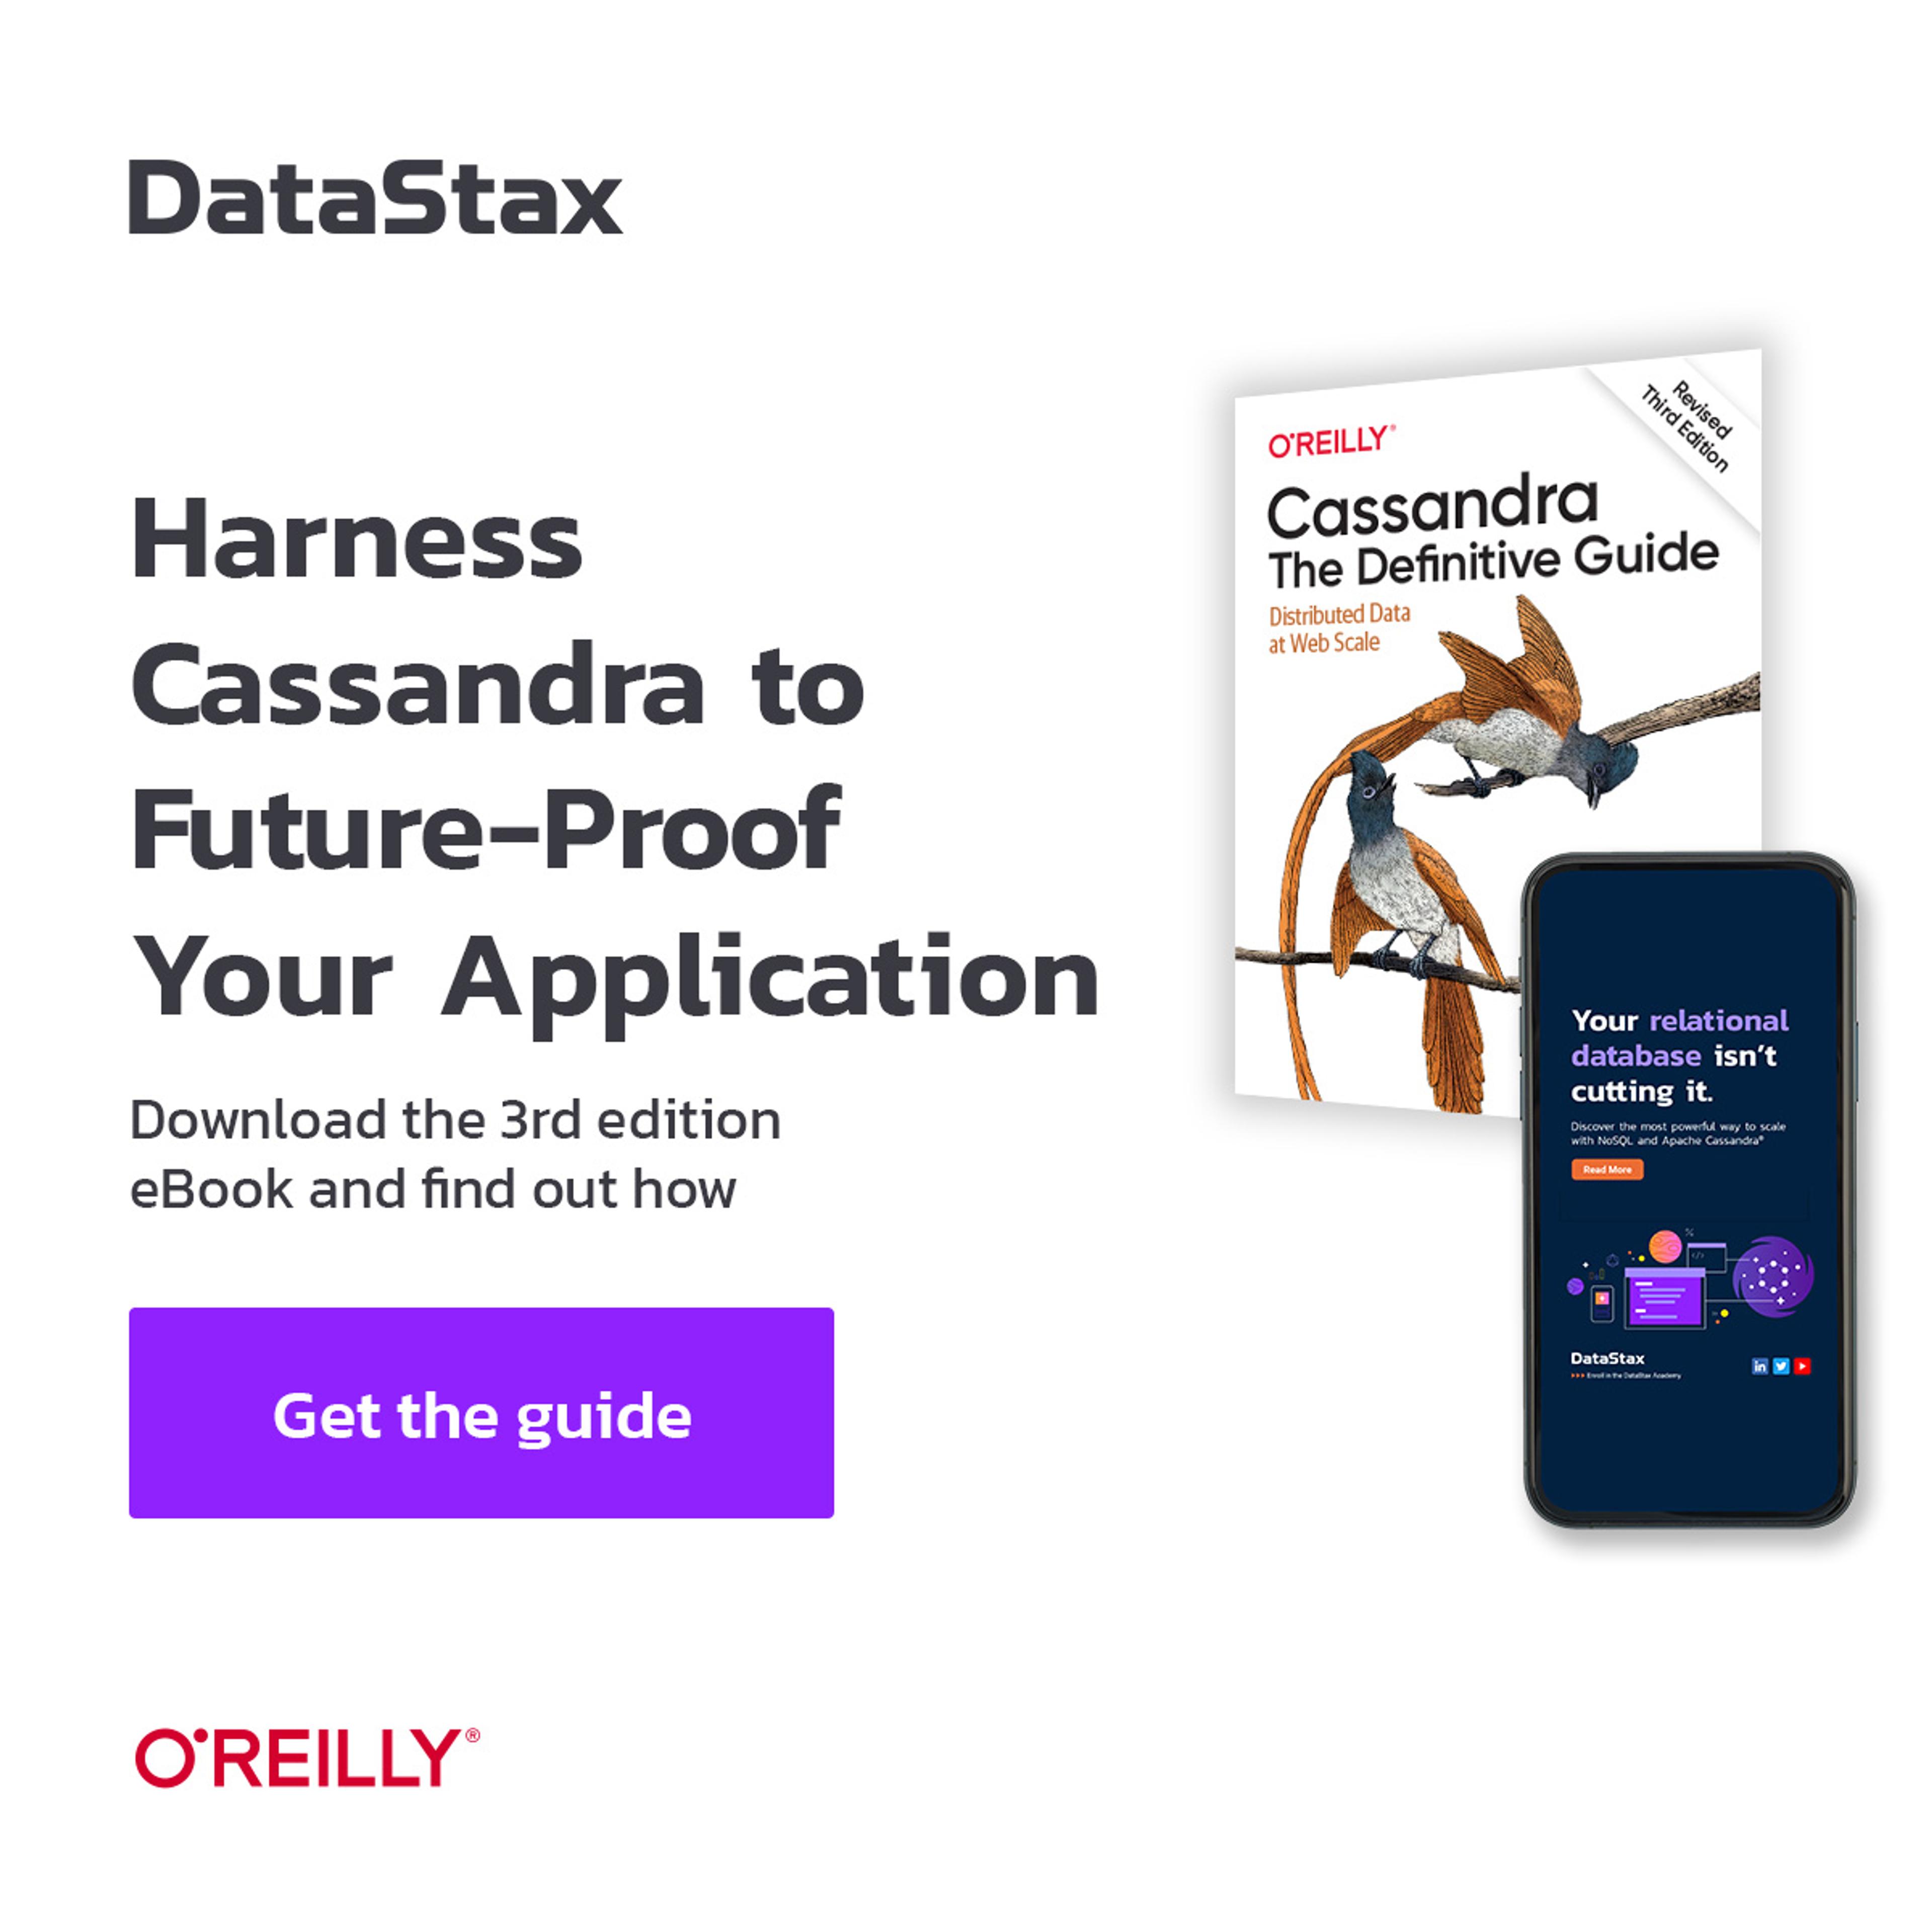 Get your Definitive Guide for Apache Cassandra 4.0